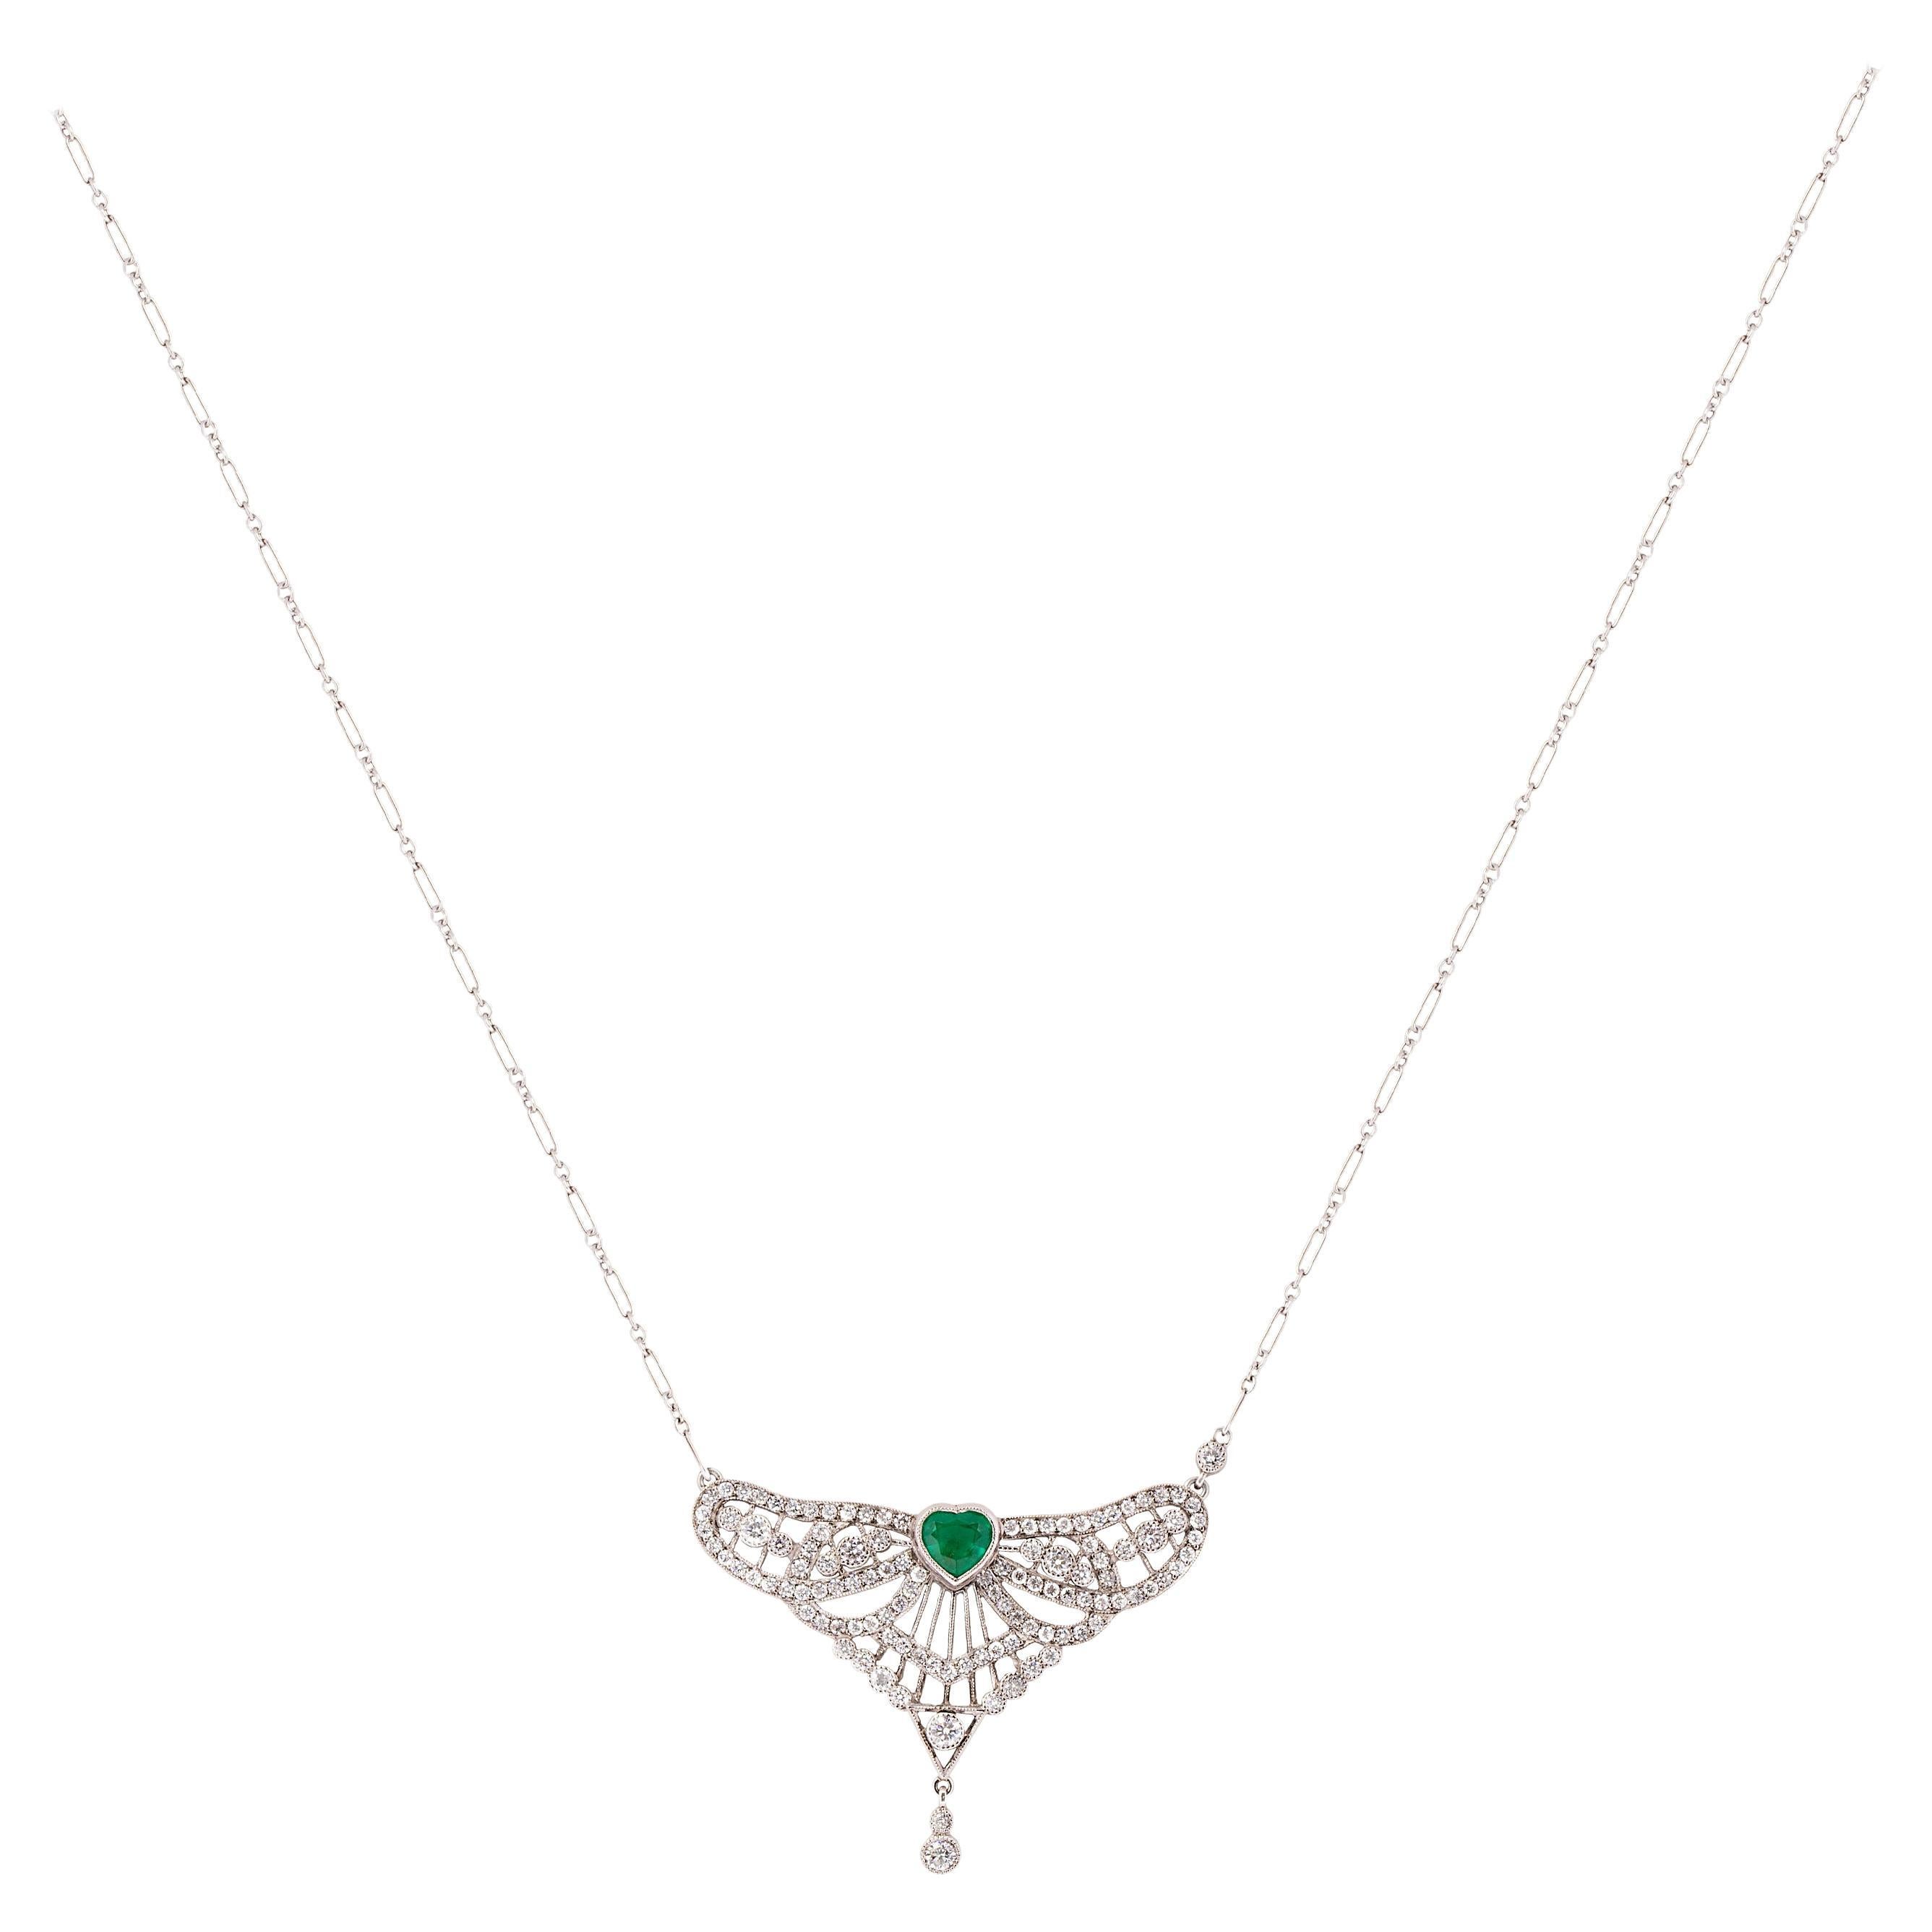 Gems Are Forever Art Deco Inspired Handcrafted 0.81 Ct Heart Emerald and Diamond For Sale